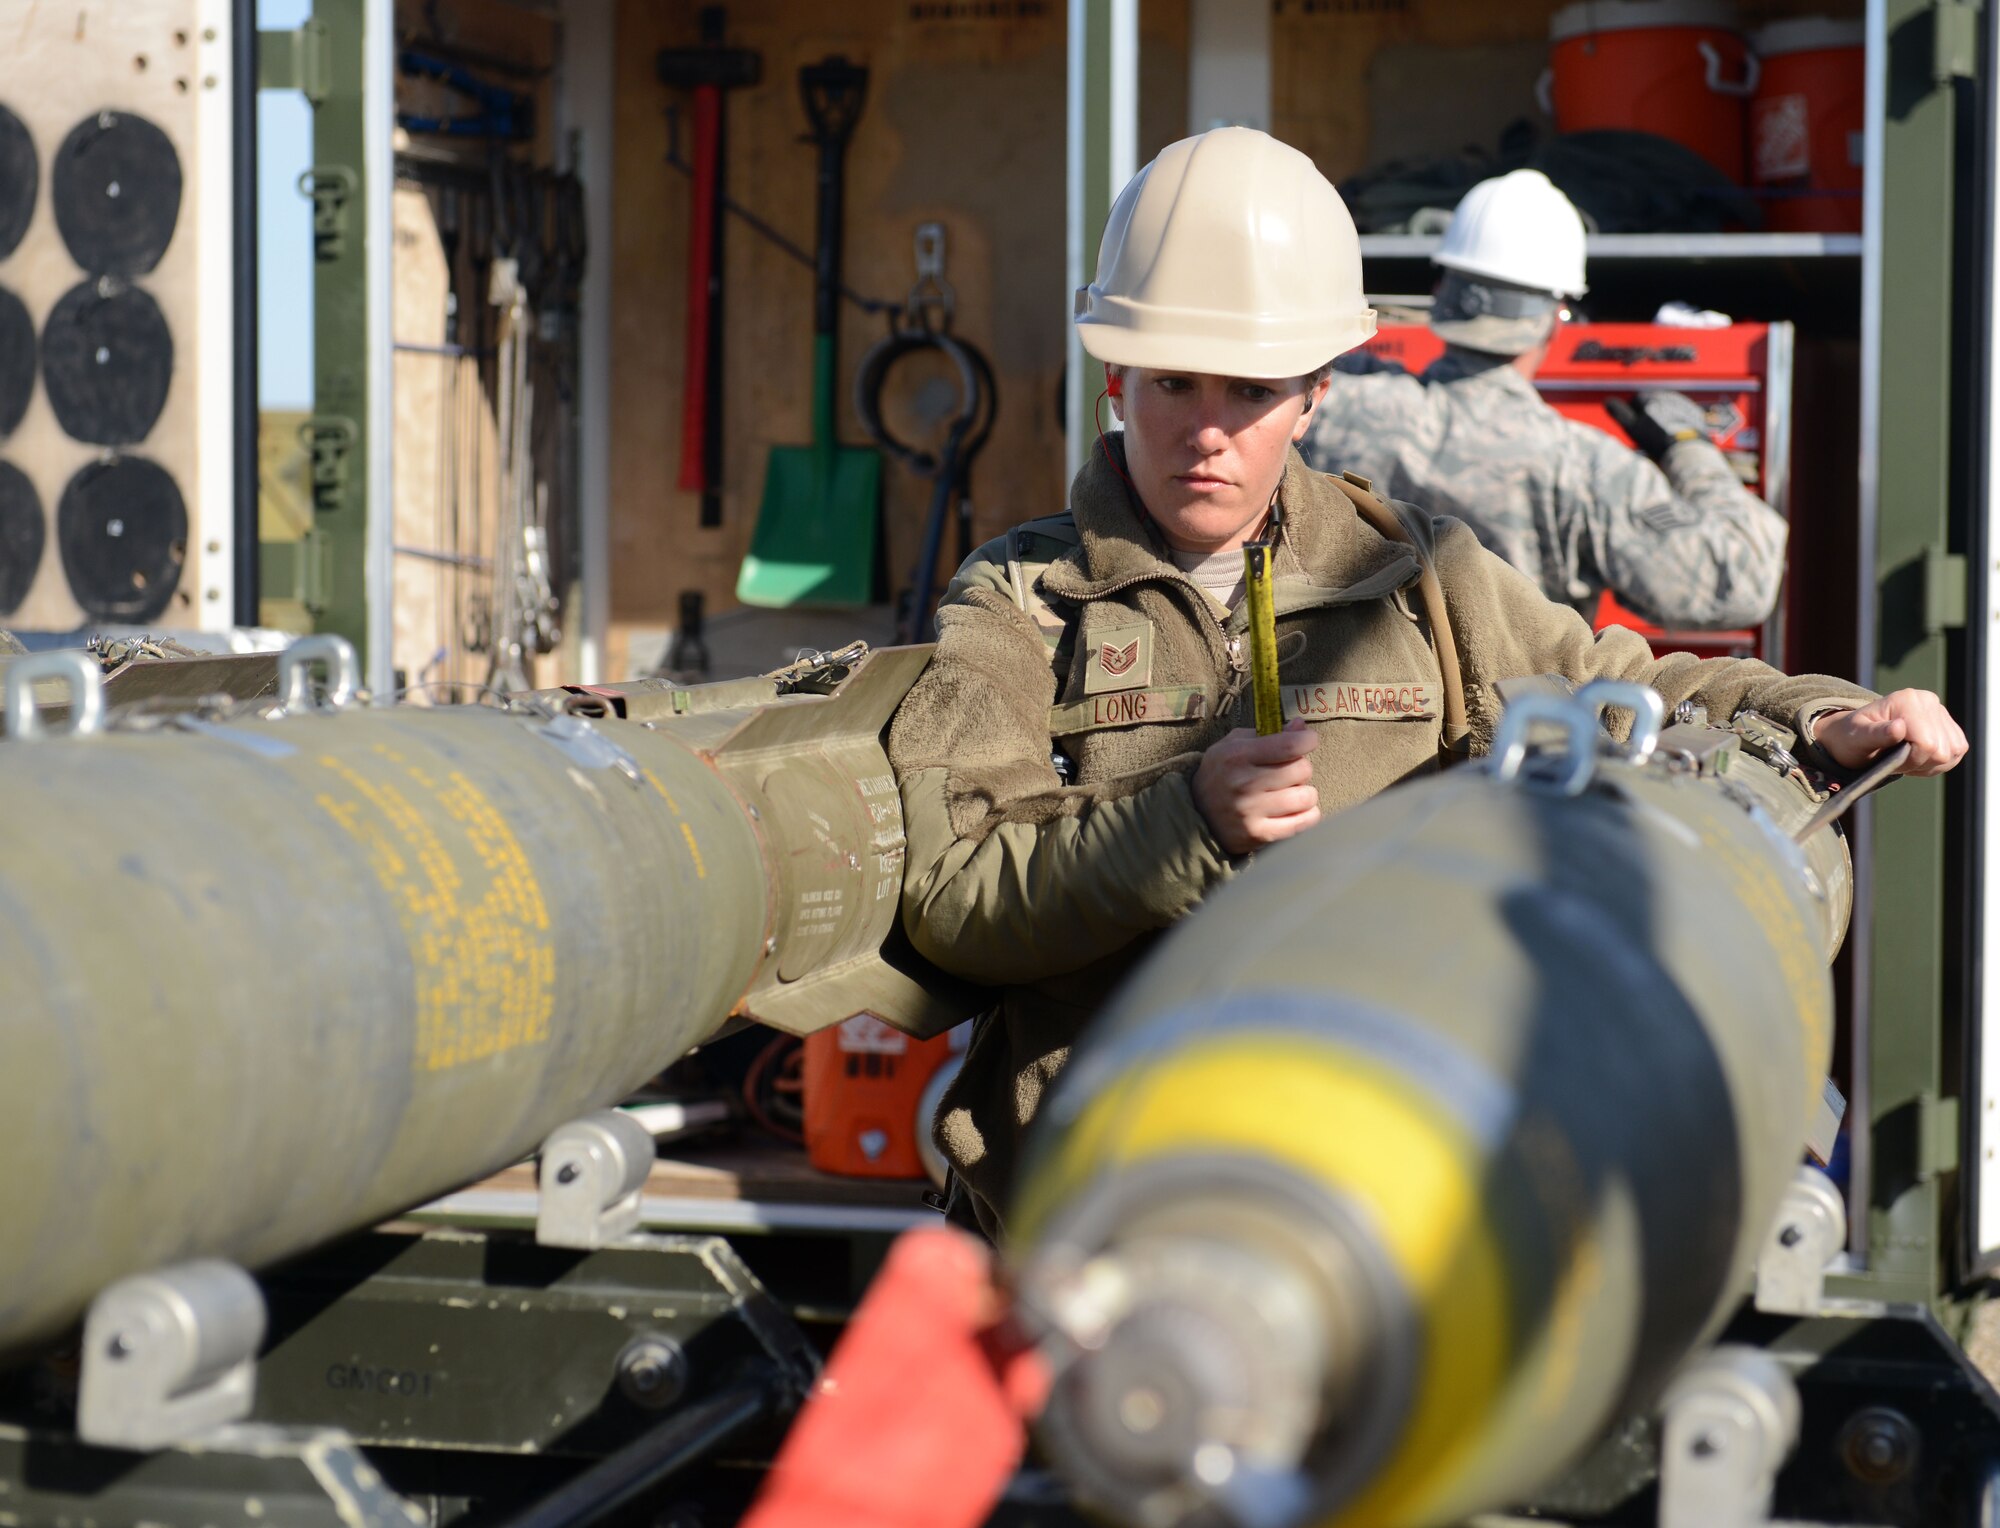 Tech. Sgt. Ashley Long, 9th Munitions Squadron combat advisor, inspects munitions March 15, 2016, at Beale Air Force Base, California. Combat advisors are experienced munitions technicians who advise munitions students attending the Air Force Combat Ammunition Center. (U.S. Air Force photo by Senior Airman Bobby Cummings)